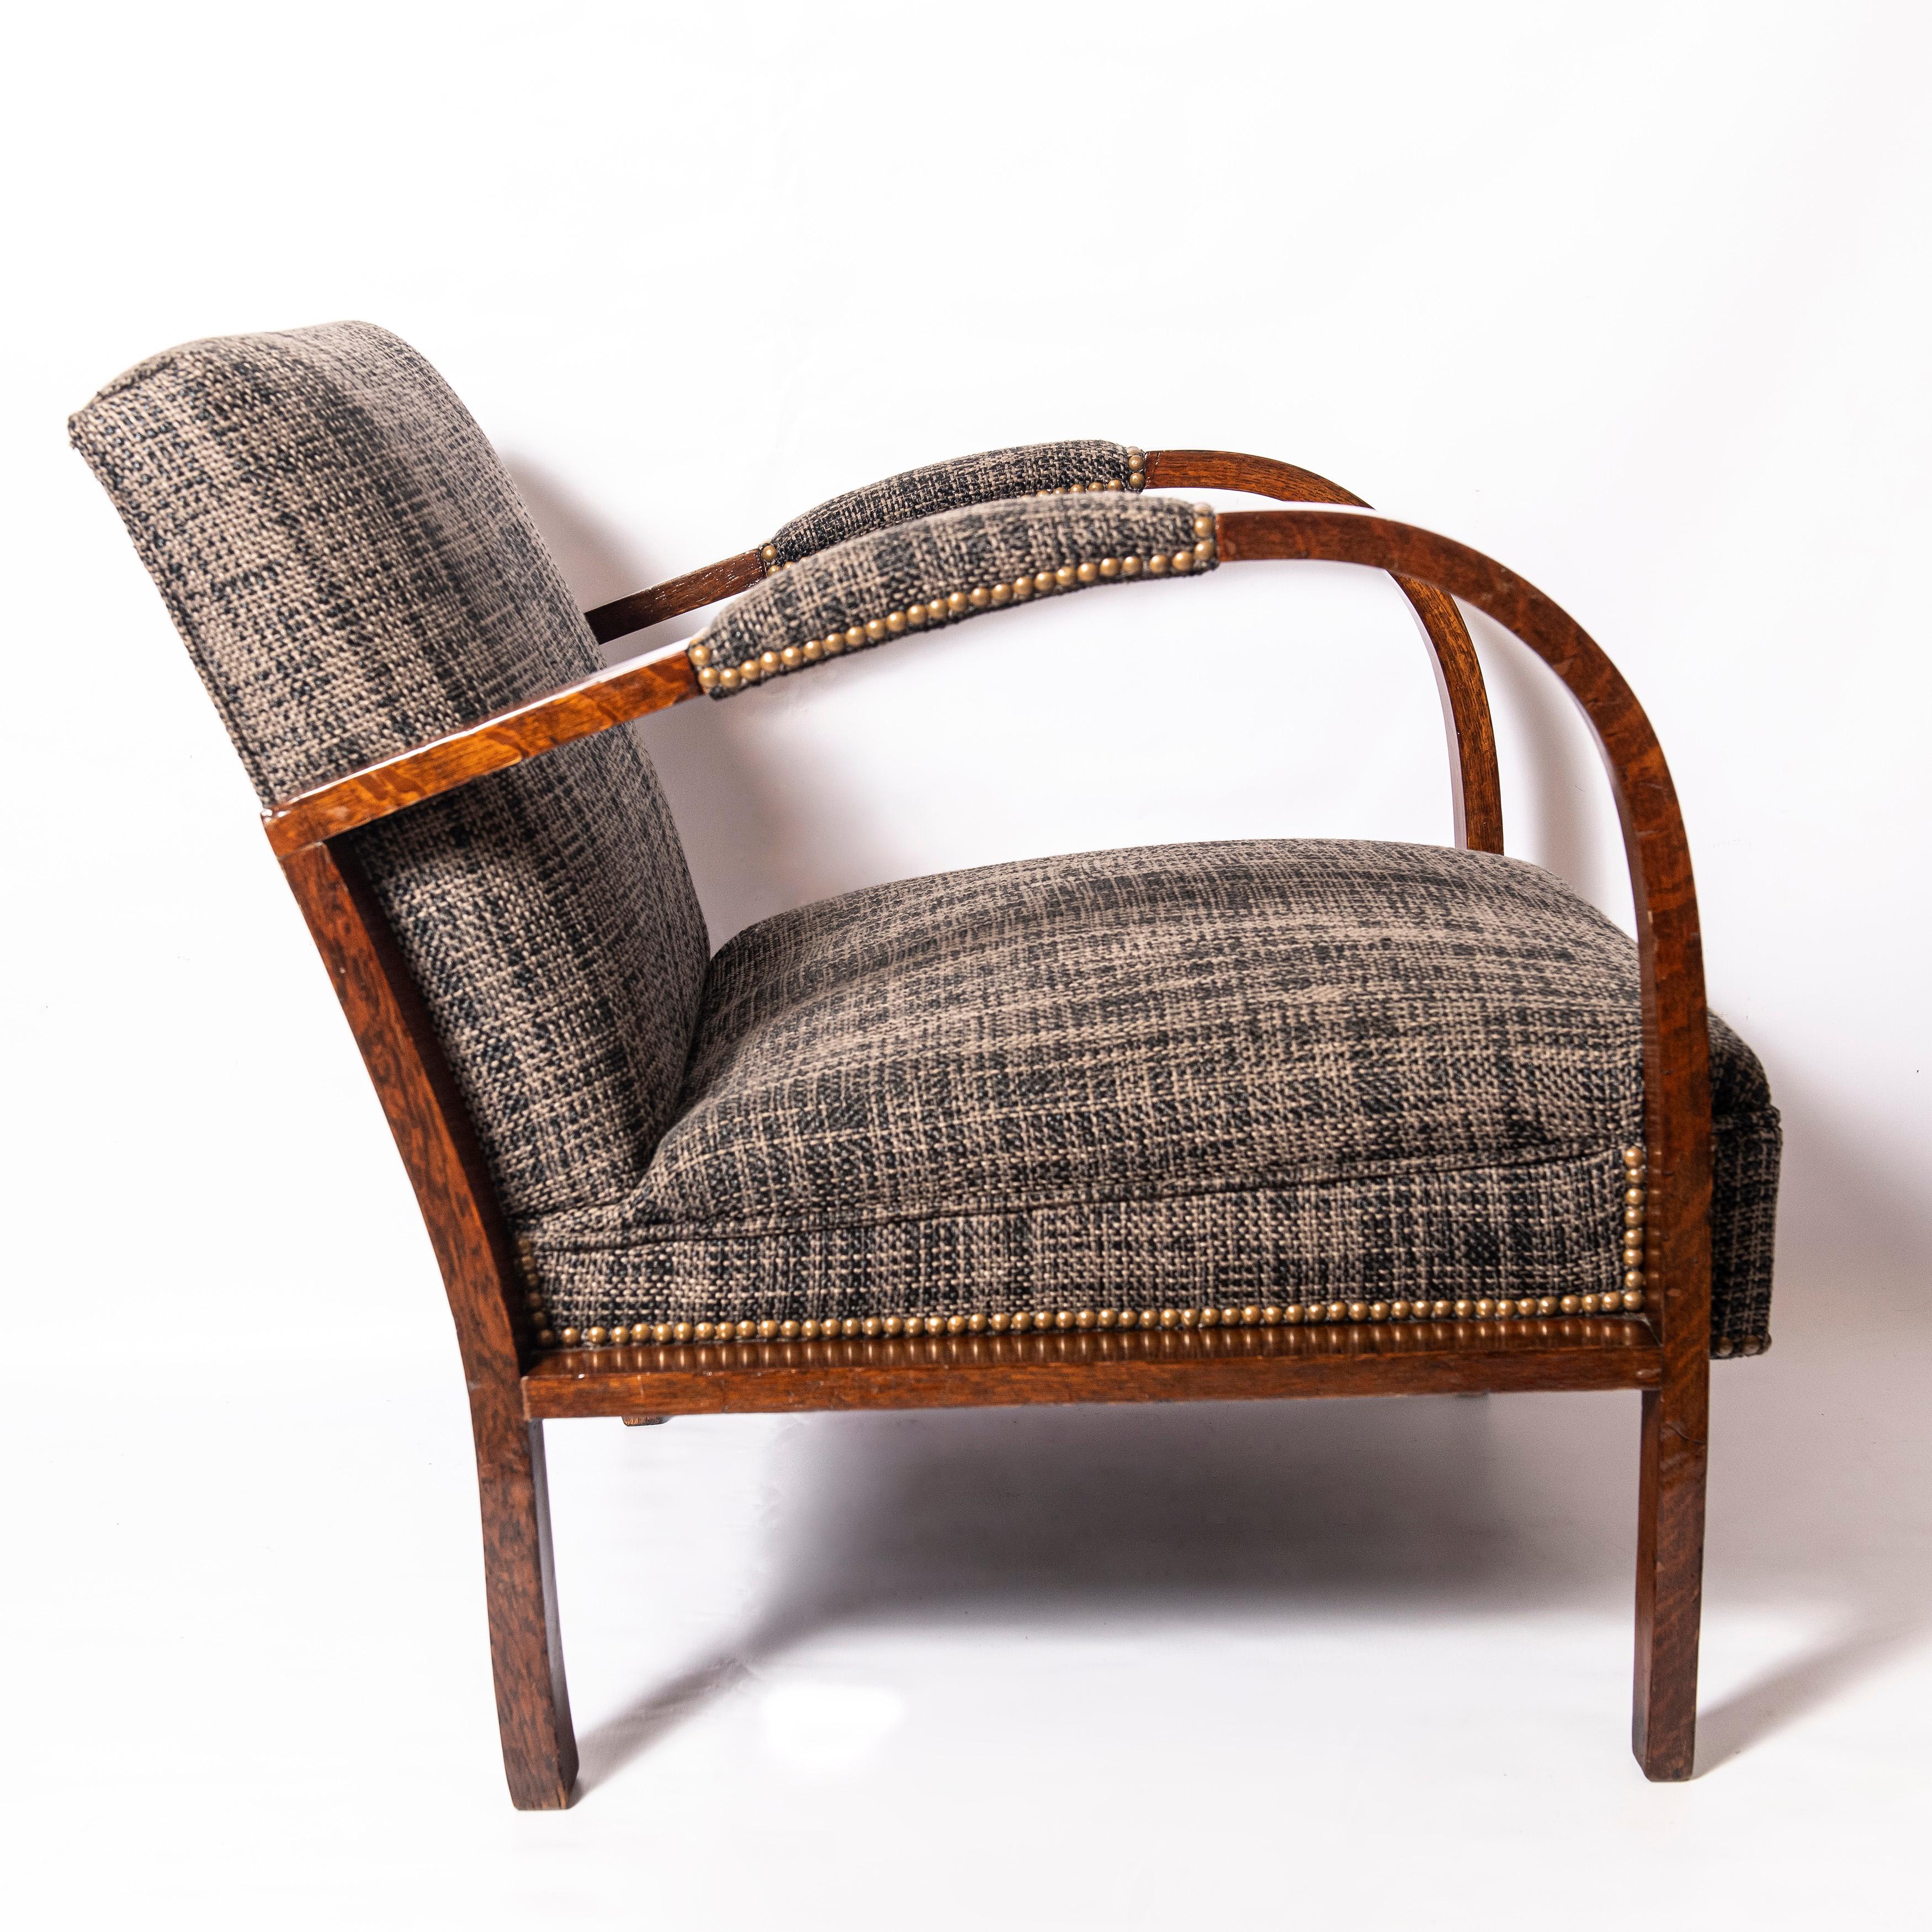 Pair of Oakwood and Fabric Armchairs, Art Deco Period, France, circa 1940 In Good Condition For Sale In Buenos Aires, Buenos Aires